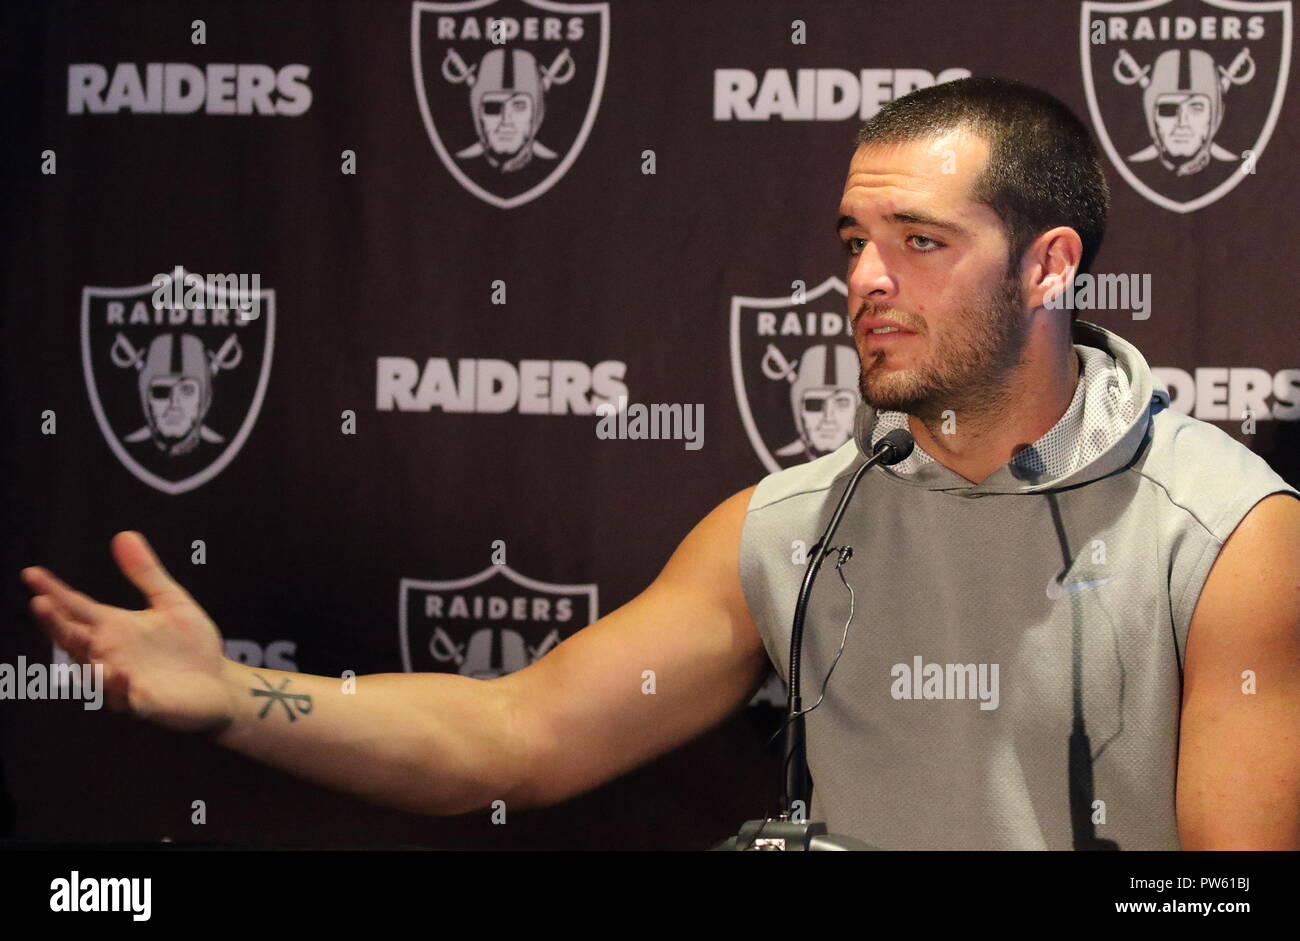 London, UK. 12th October, 2018. Quarterback Derek Carr at the Oakland Raiders Press Conference at the London Hilton, Wembley, UK ahead of their NFL UK International Series game vs Seattle Seahawks, Wembley Stadium, London, UK, 12th October 2018  Photo by Keith Mayhew Credit: KEITH MAYHEW/Alamy Live News Stock Photo